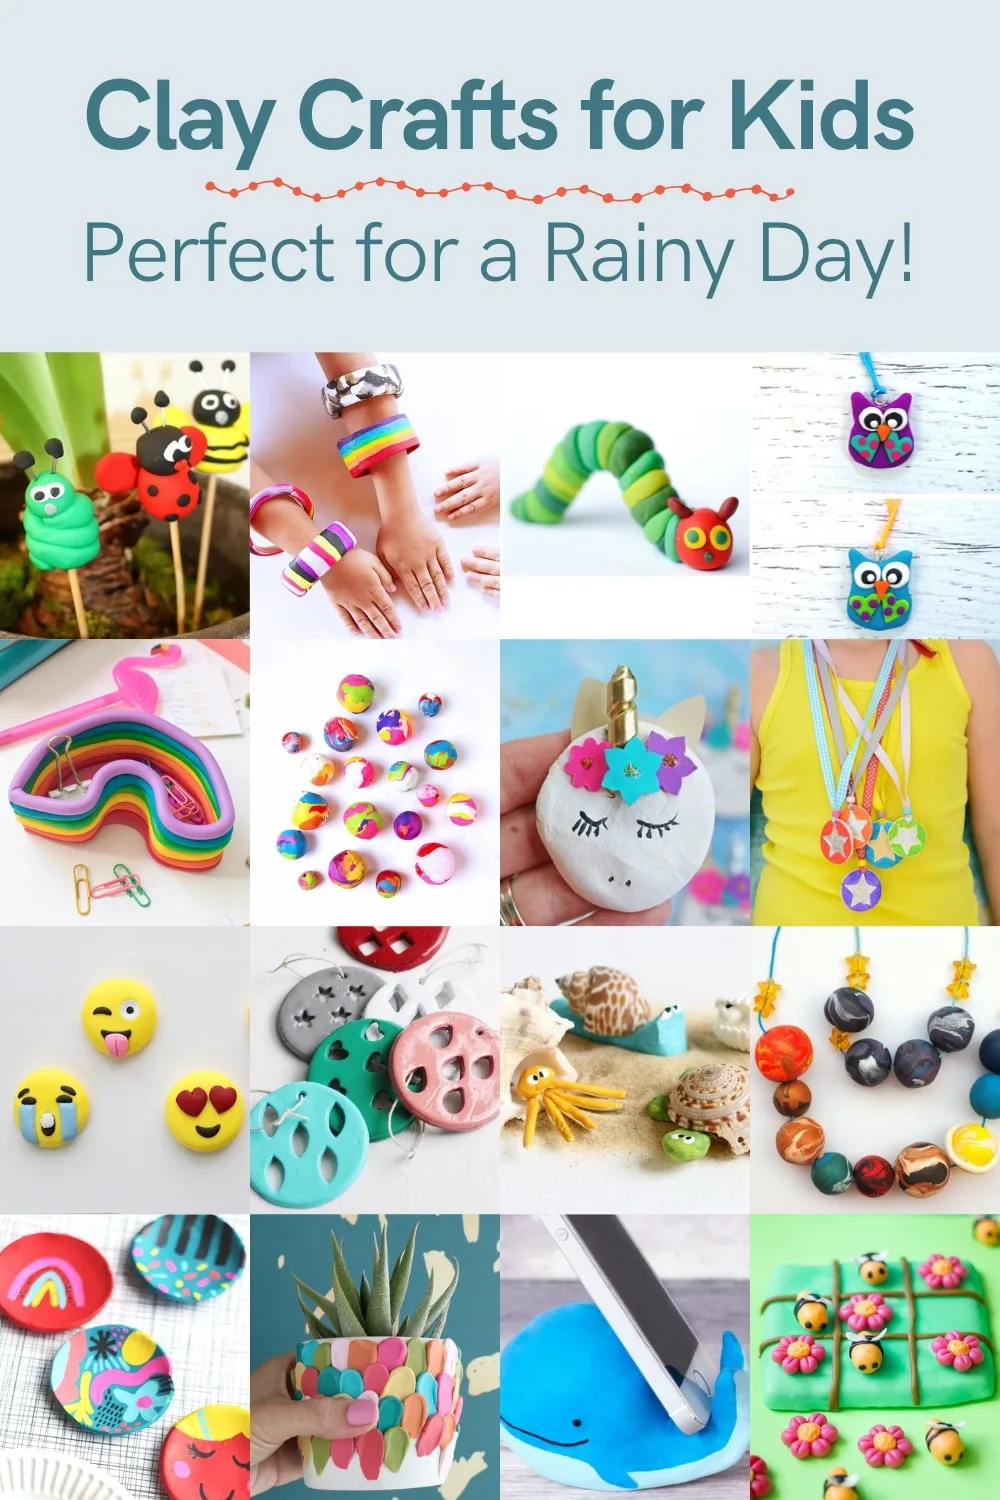 Clay Crafts for Kids: Perfect for Rainy Day Fun - DIY Candy